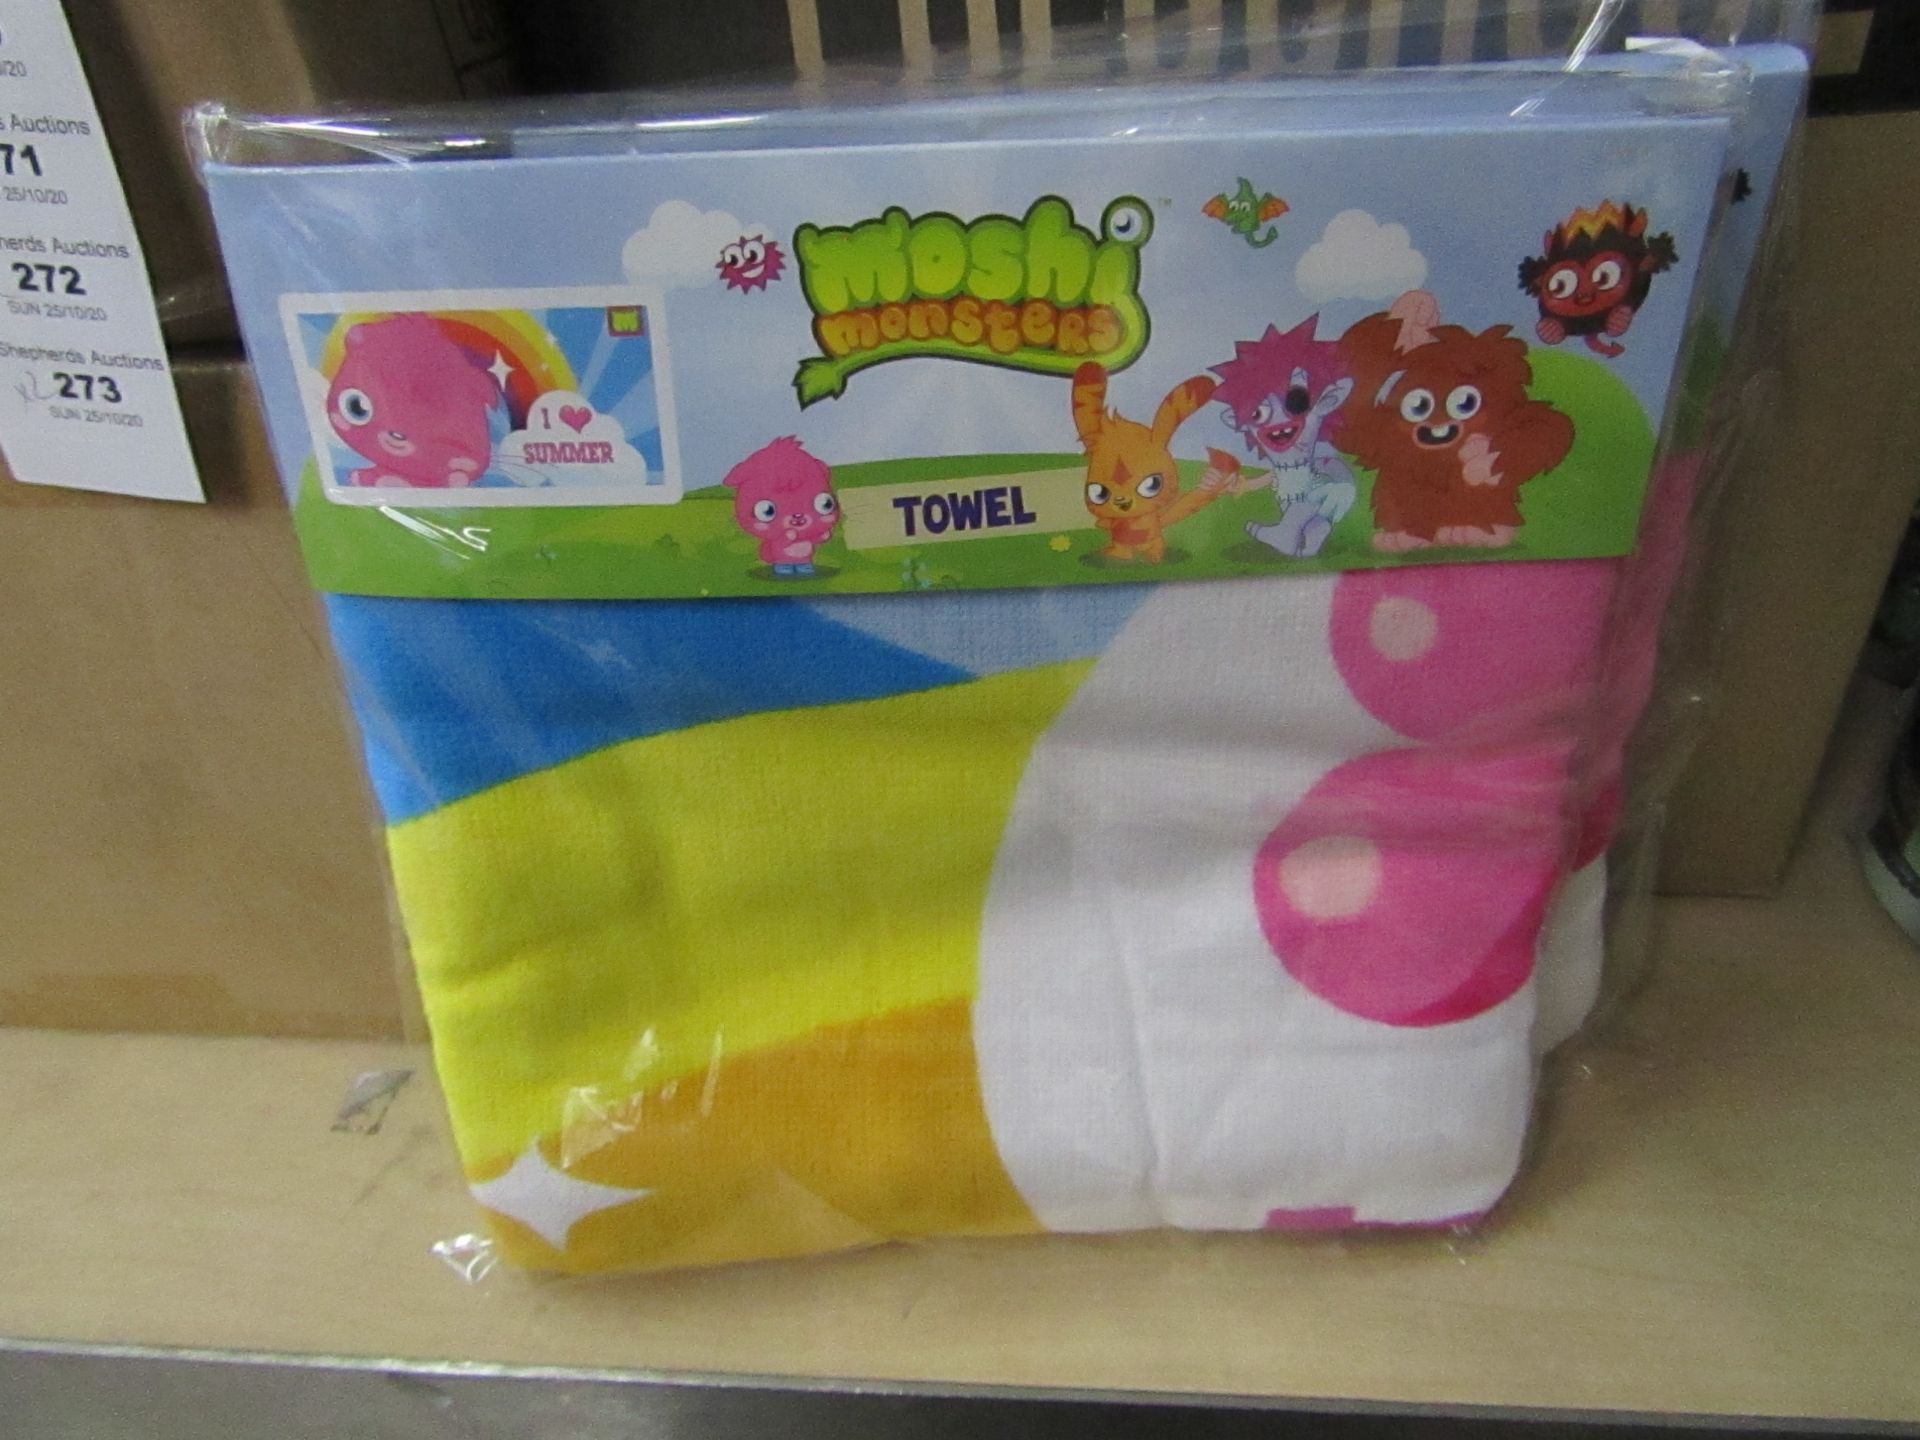 2 x Moshi monsters 'I Love Summer' Beach towels. New & Packaged